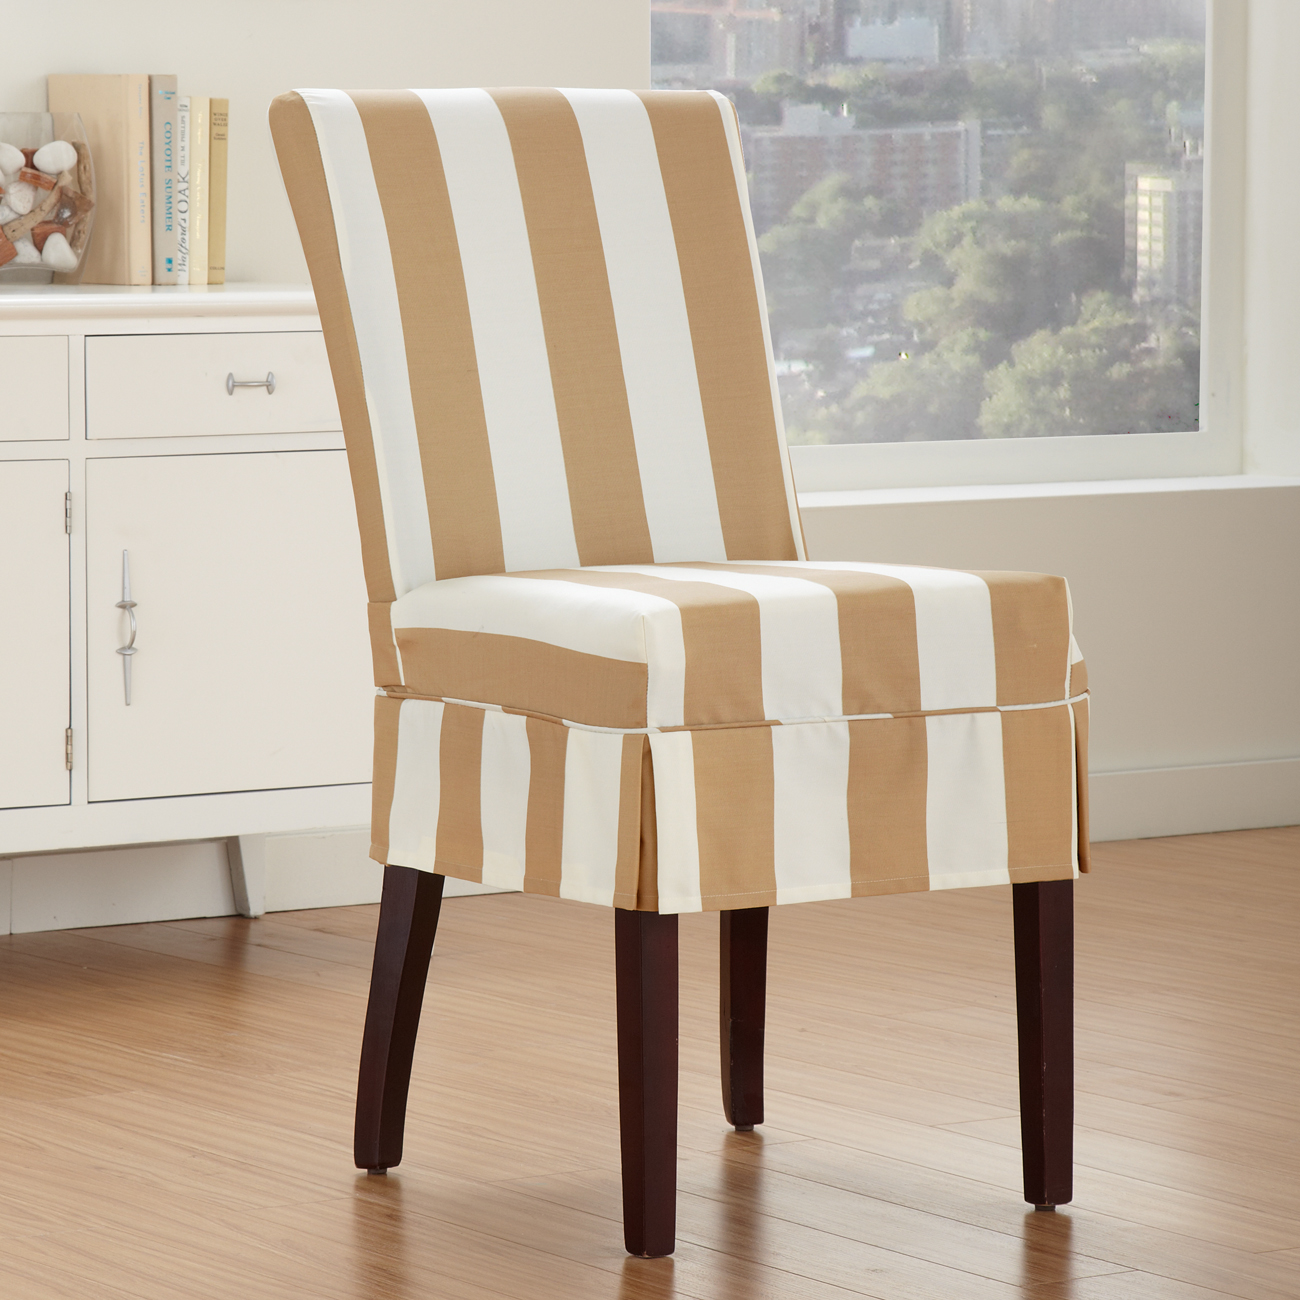 slip covers dining chairs photo - 1